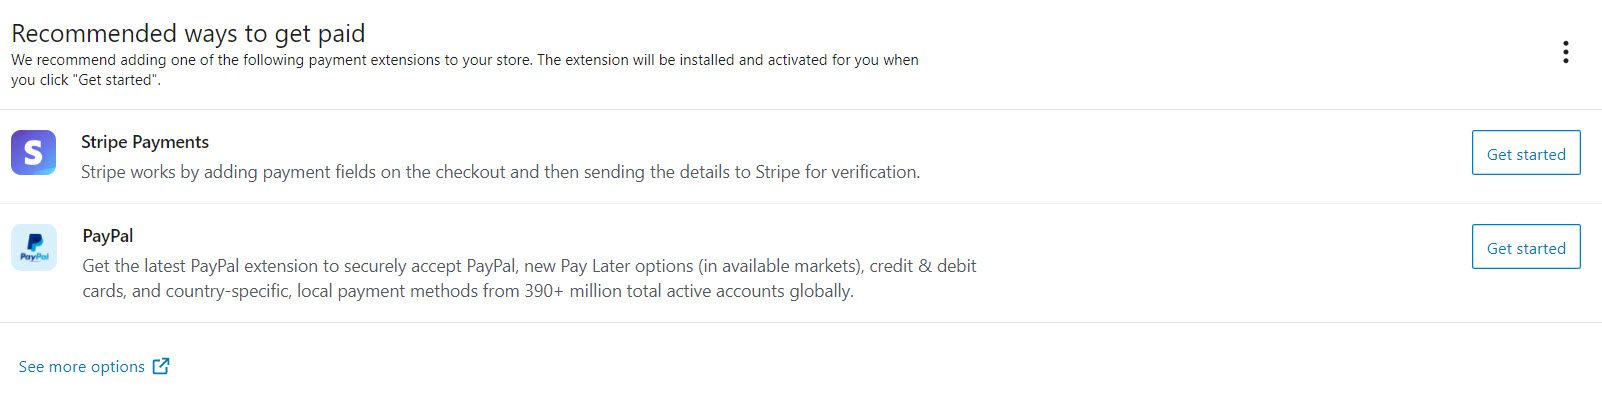 stripe and paypal payment gateways 